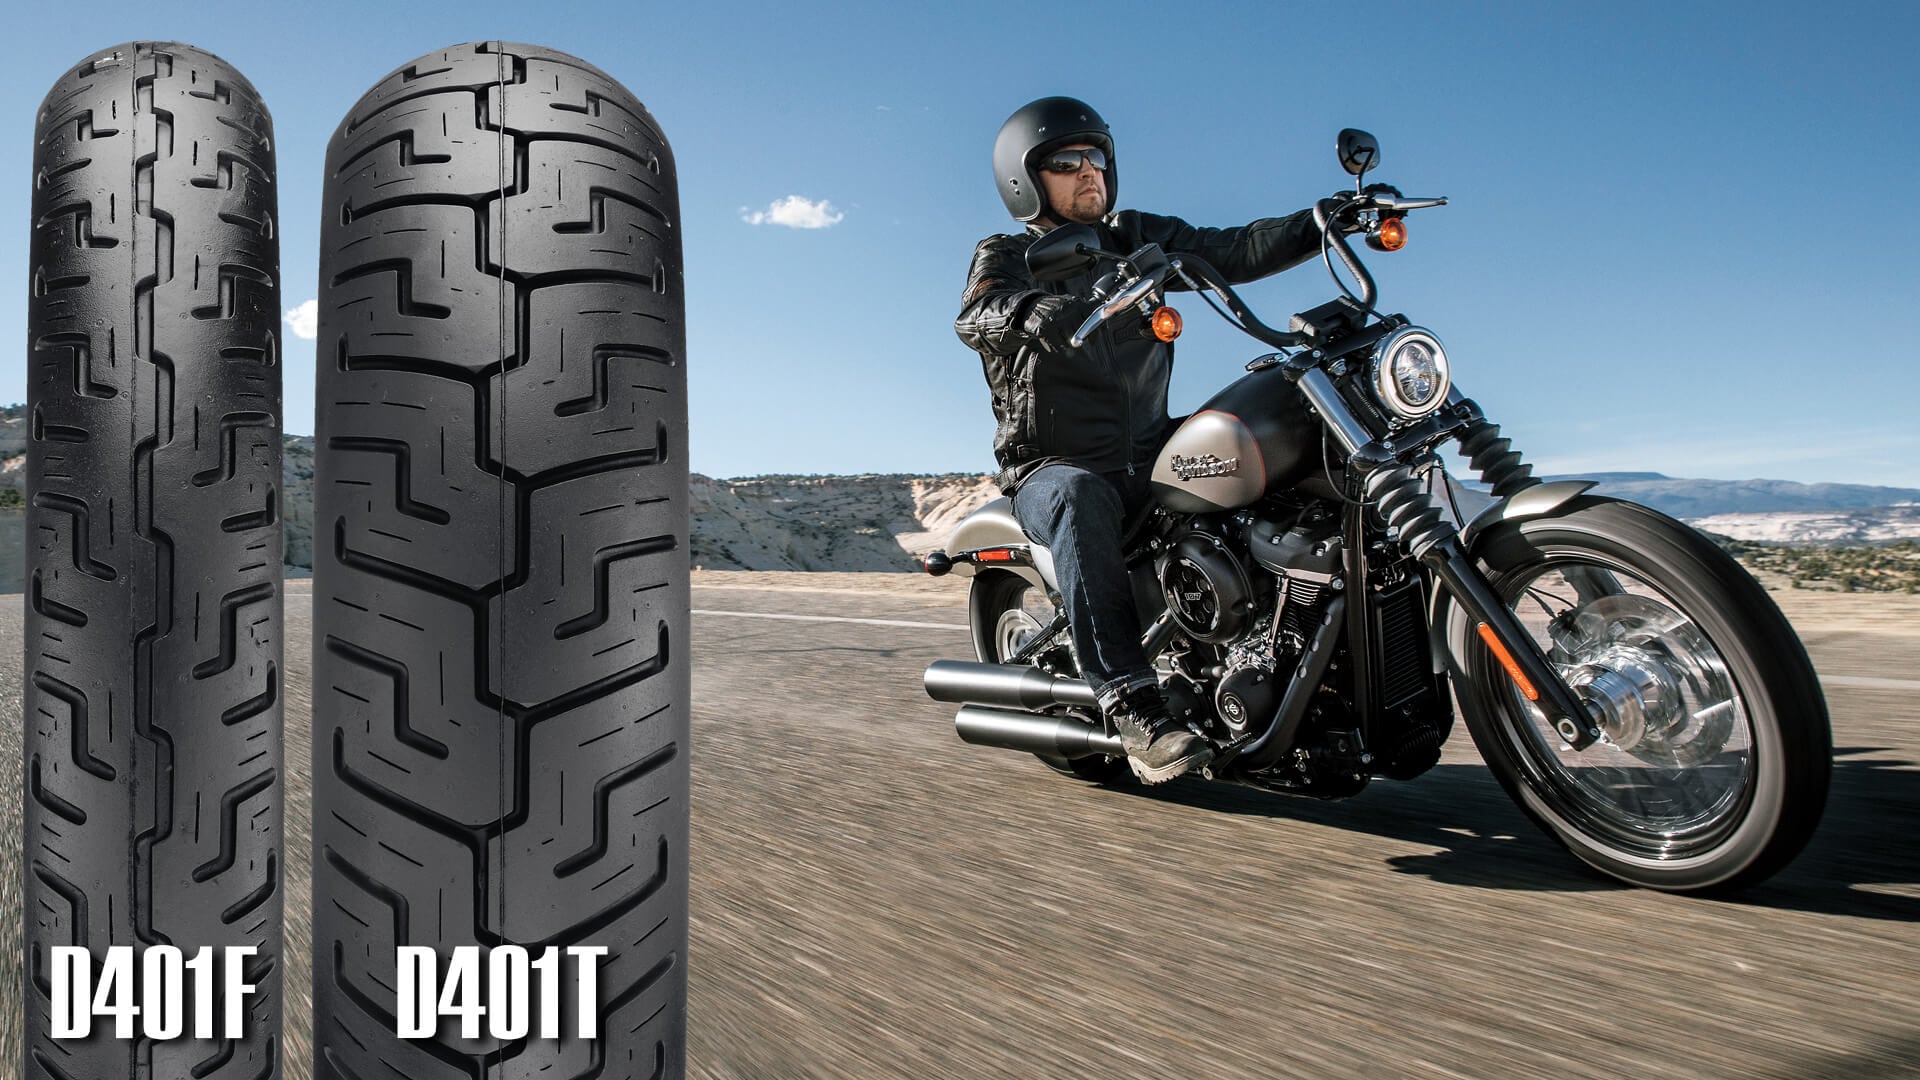 Dunlop Introduces New Harley Davidson Tires For 2018 Dunlop Motorcycle Tires